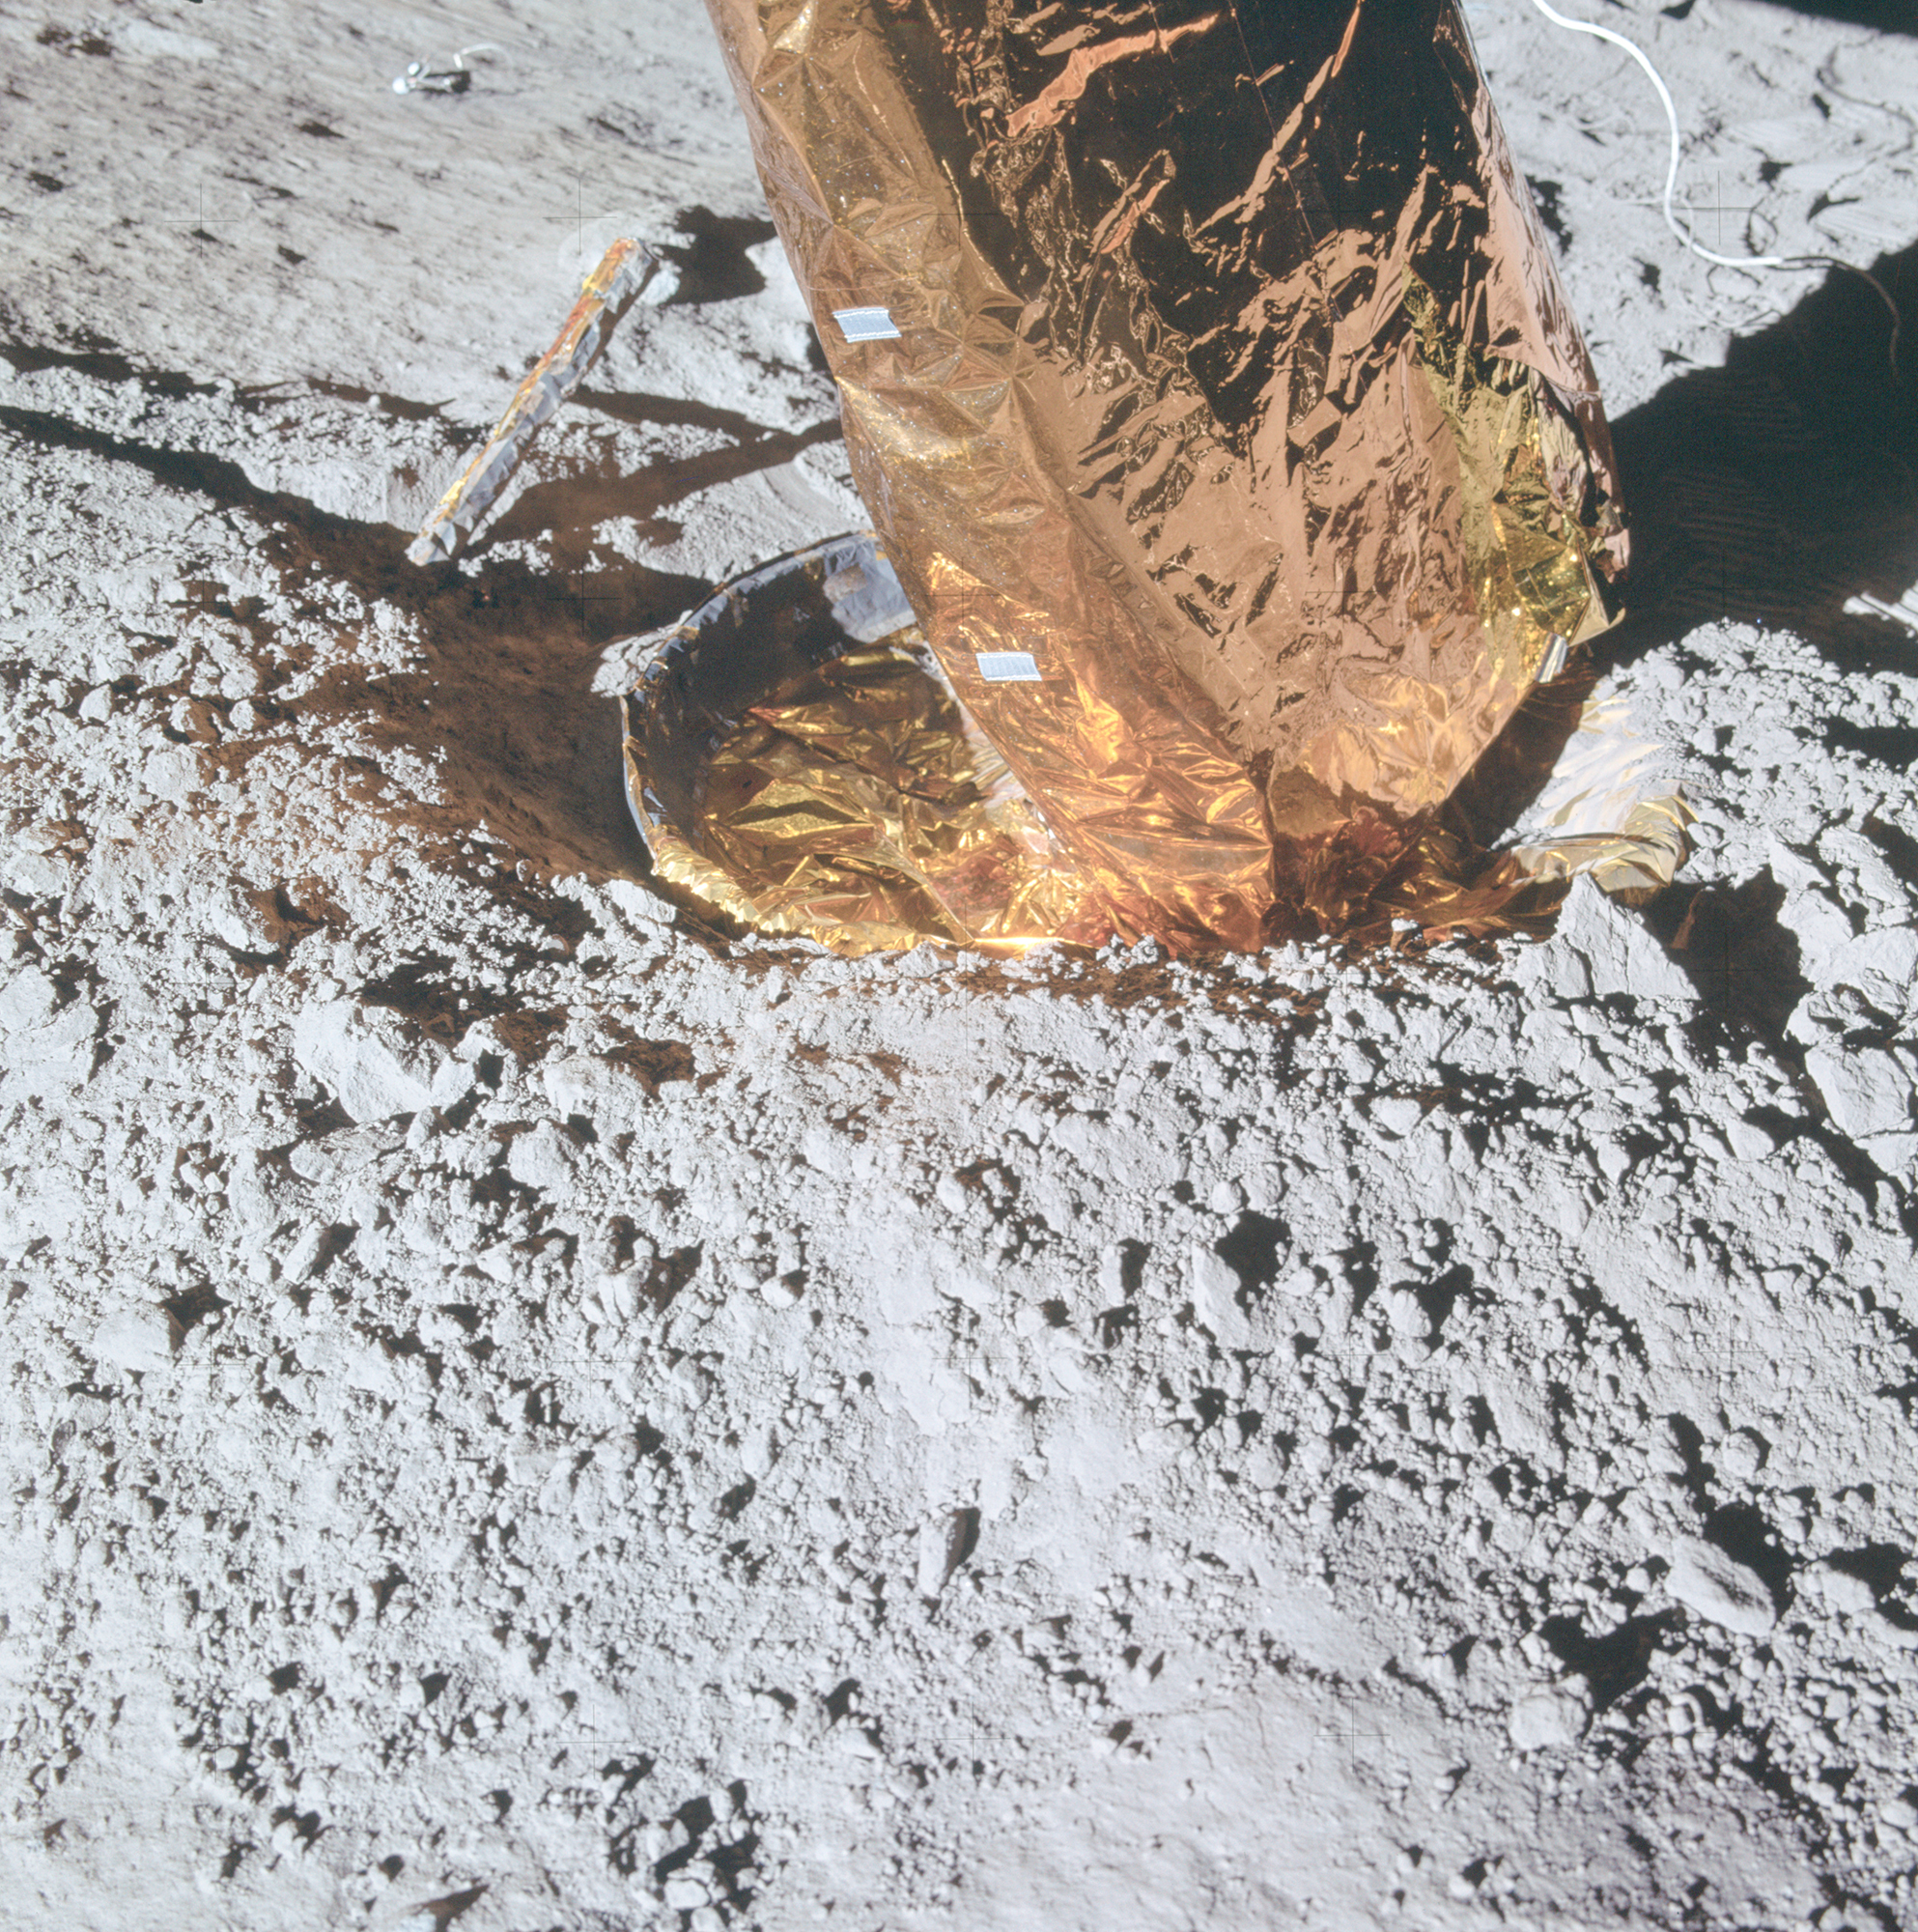 apollo-14-shows-the-north-footpad-which-has-dug-into-the-surface-of-moon.jpg